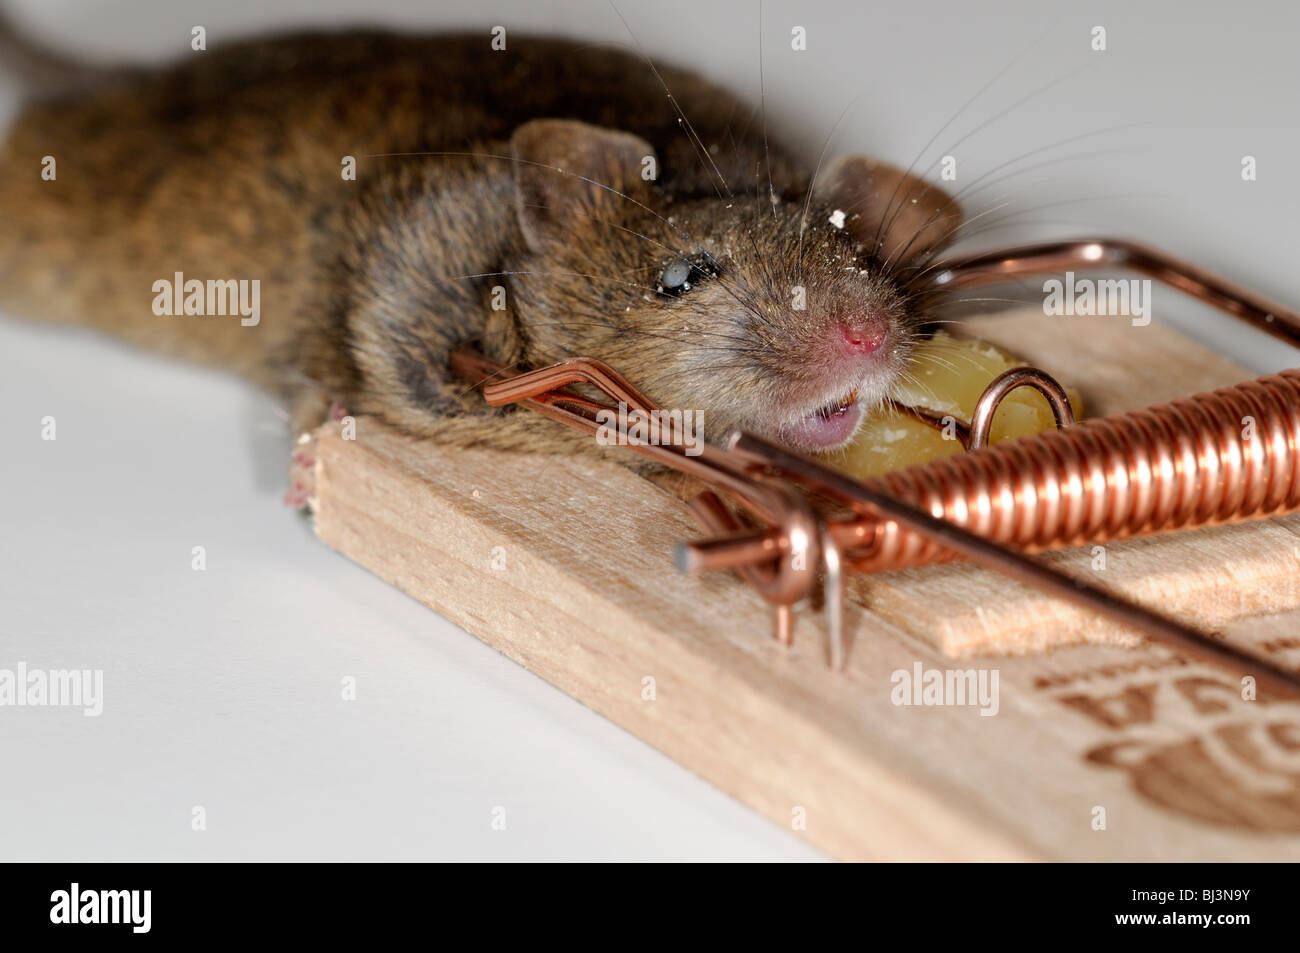 https://c8.alamy.com/comp/BJ3N9Y/dead-mouse-caught-in-a-spring-mouse-trap-plain-background-cheese-bait-BJ3N9Y.jpg